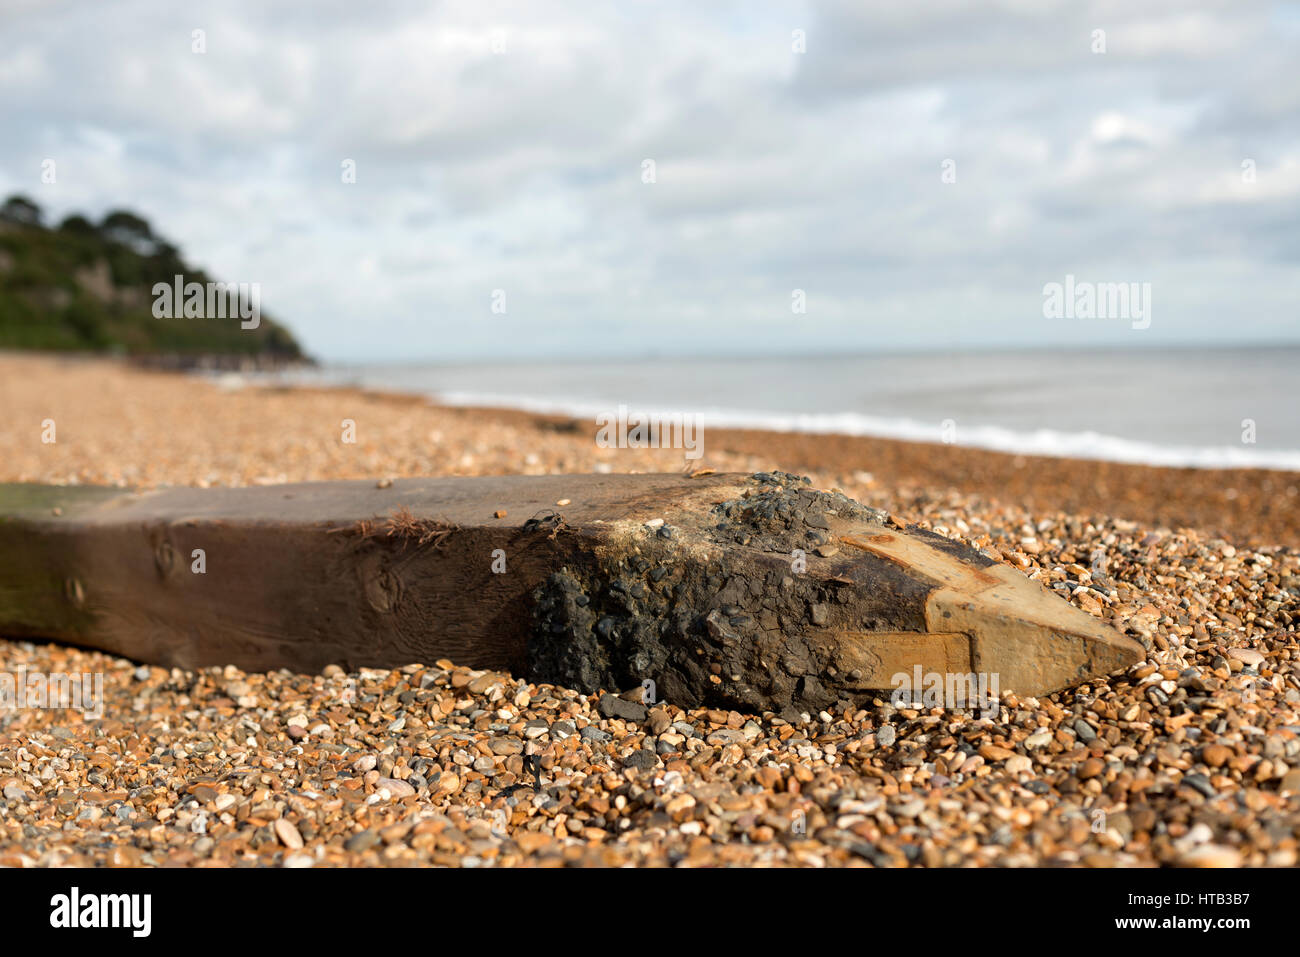 Historic (100-years old) wooden groyne, washed up on the beach due to coastal erosion, Bawdsey Ferry, Suffolk, UK. Stock Photo